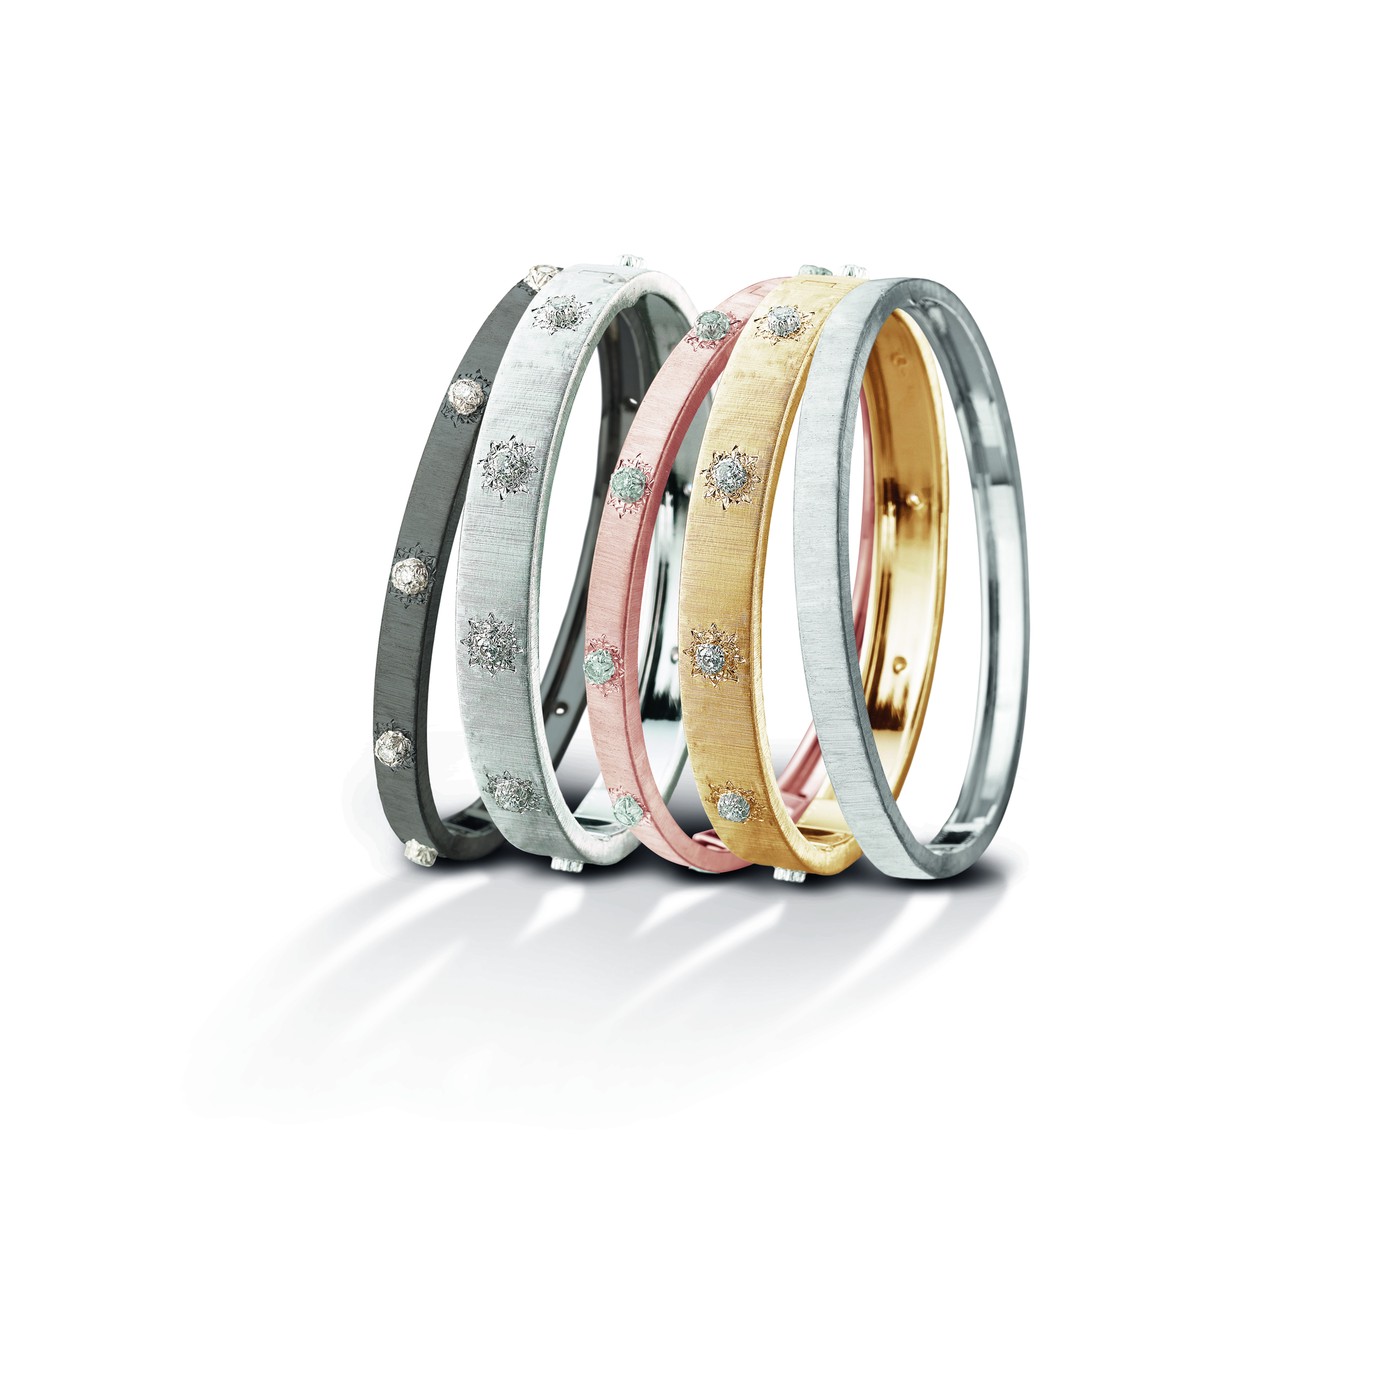 Macri Classica bracelets in yellow, white, pink and black gold